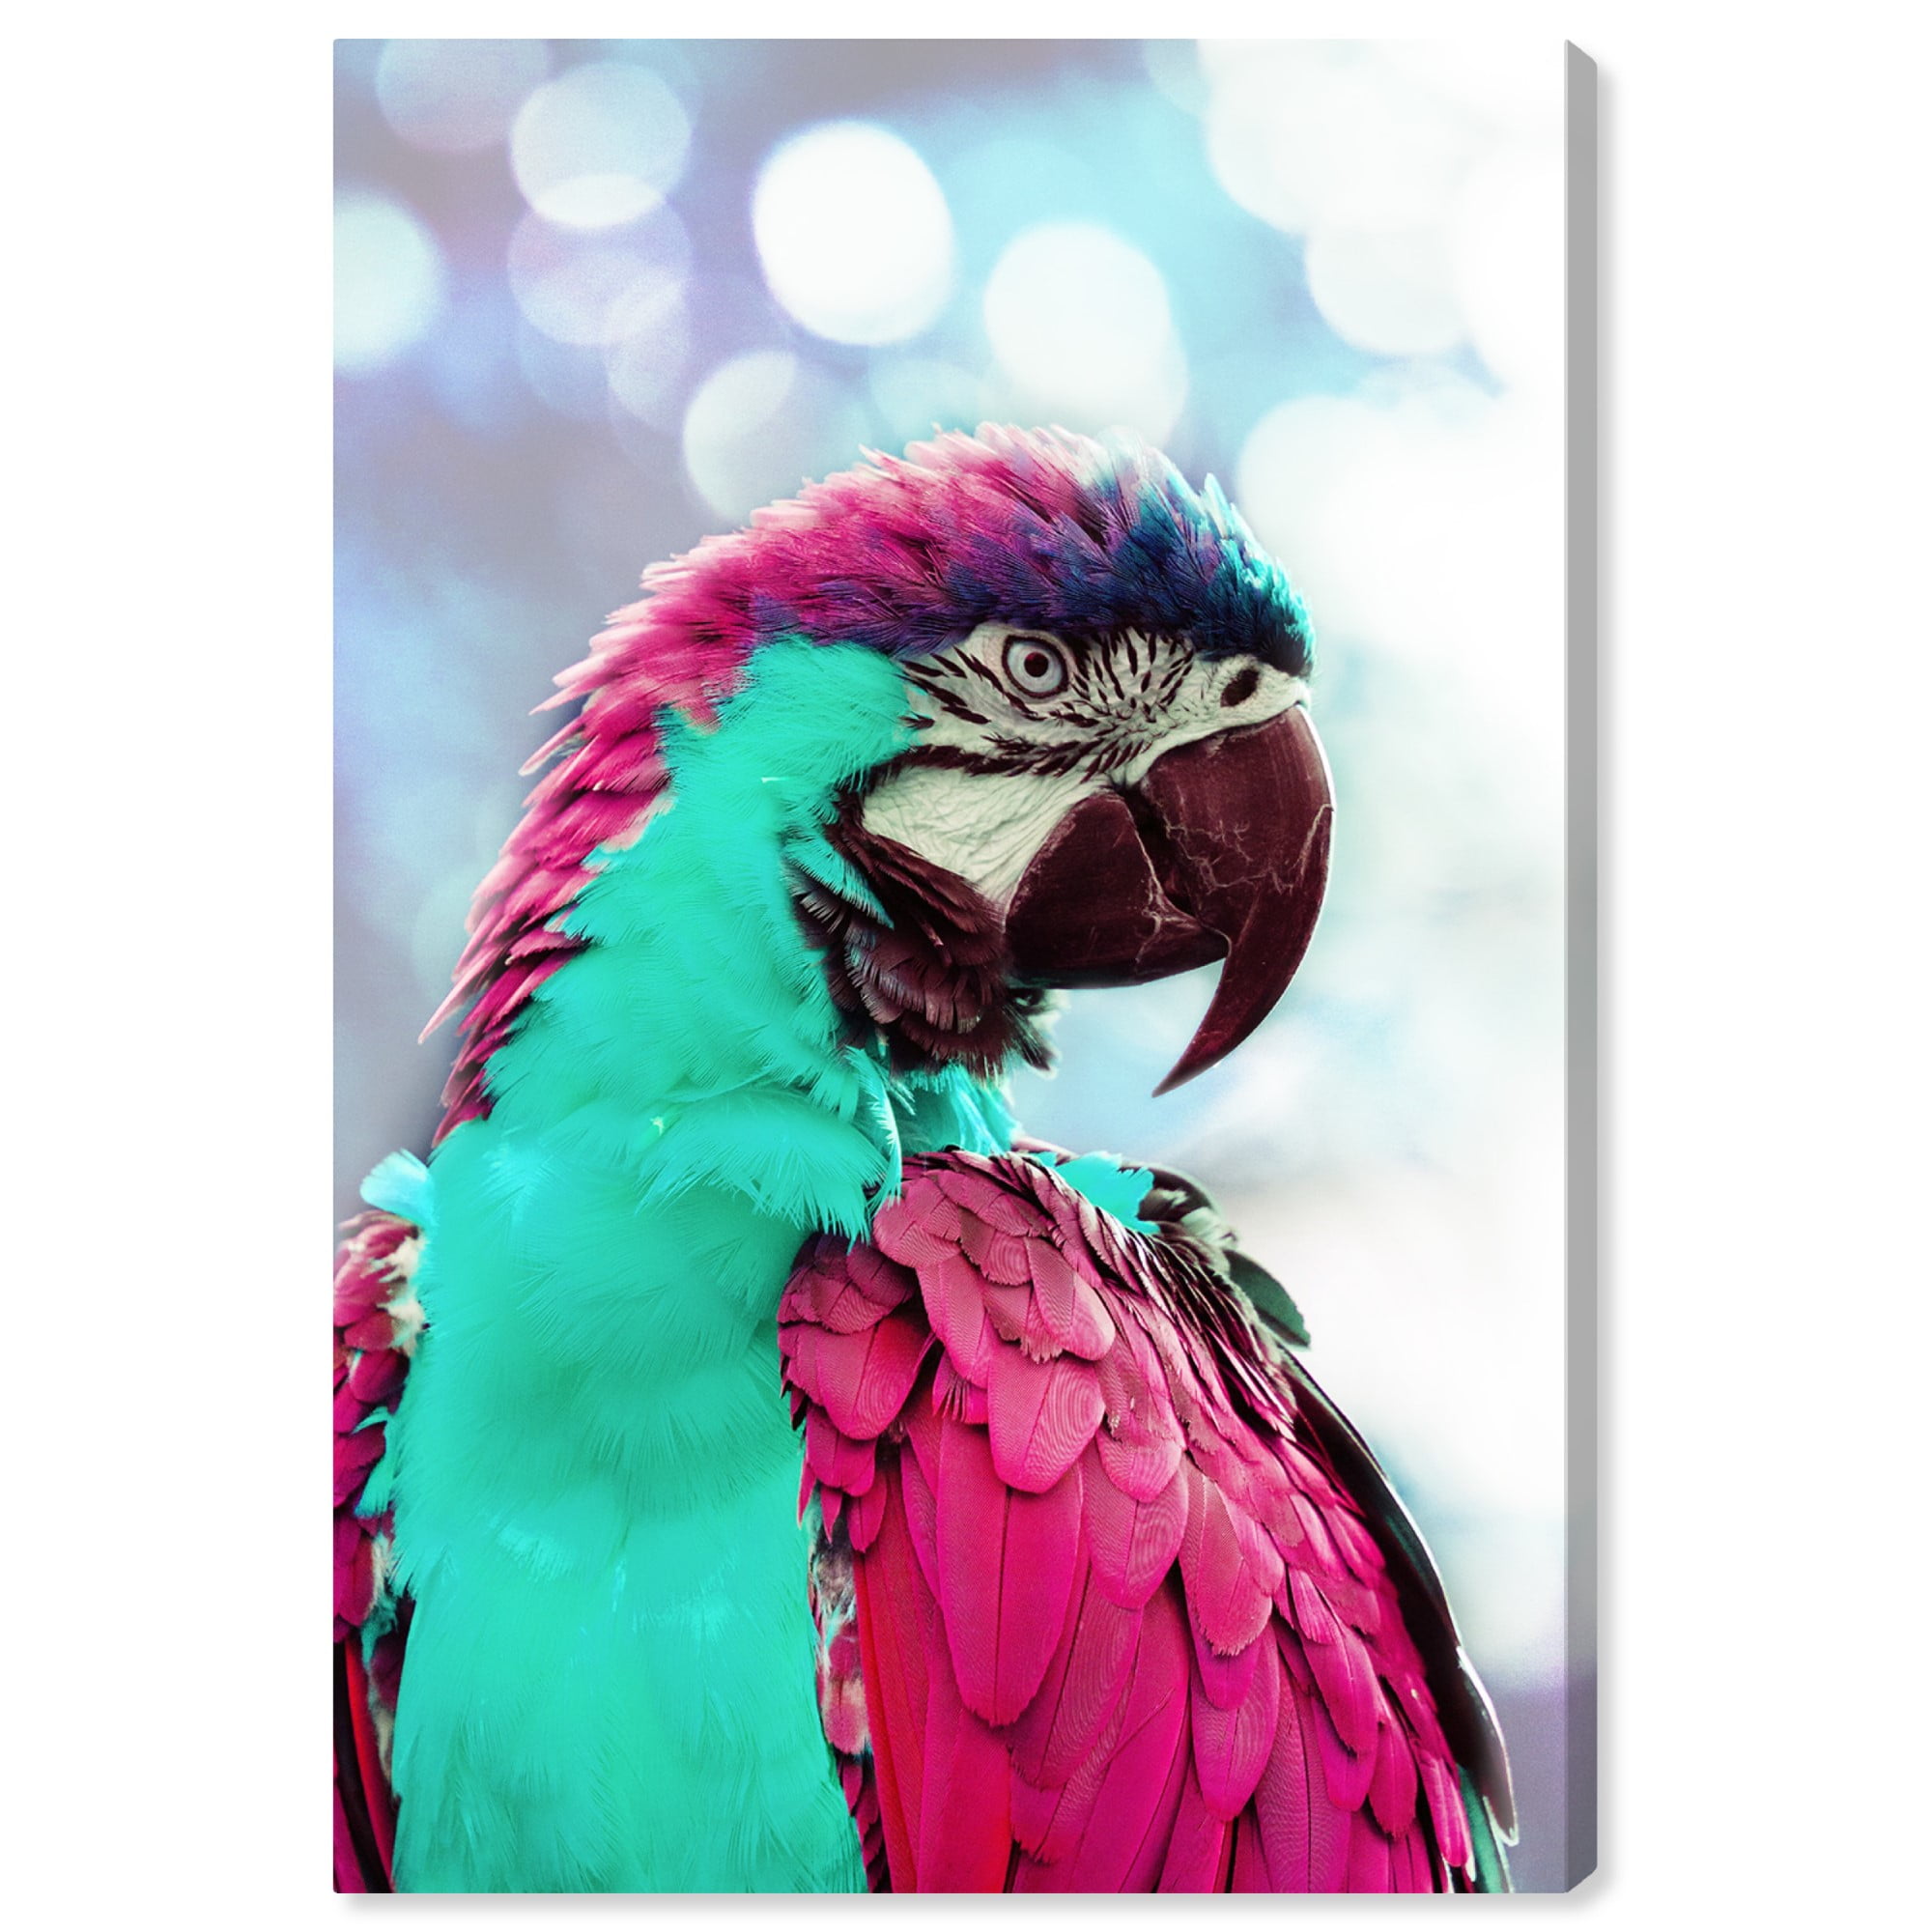 Wall Mural Macaw Feathers (Blue/Green) 